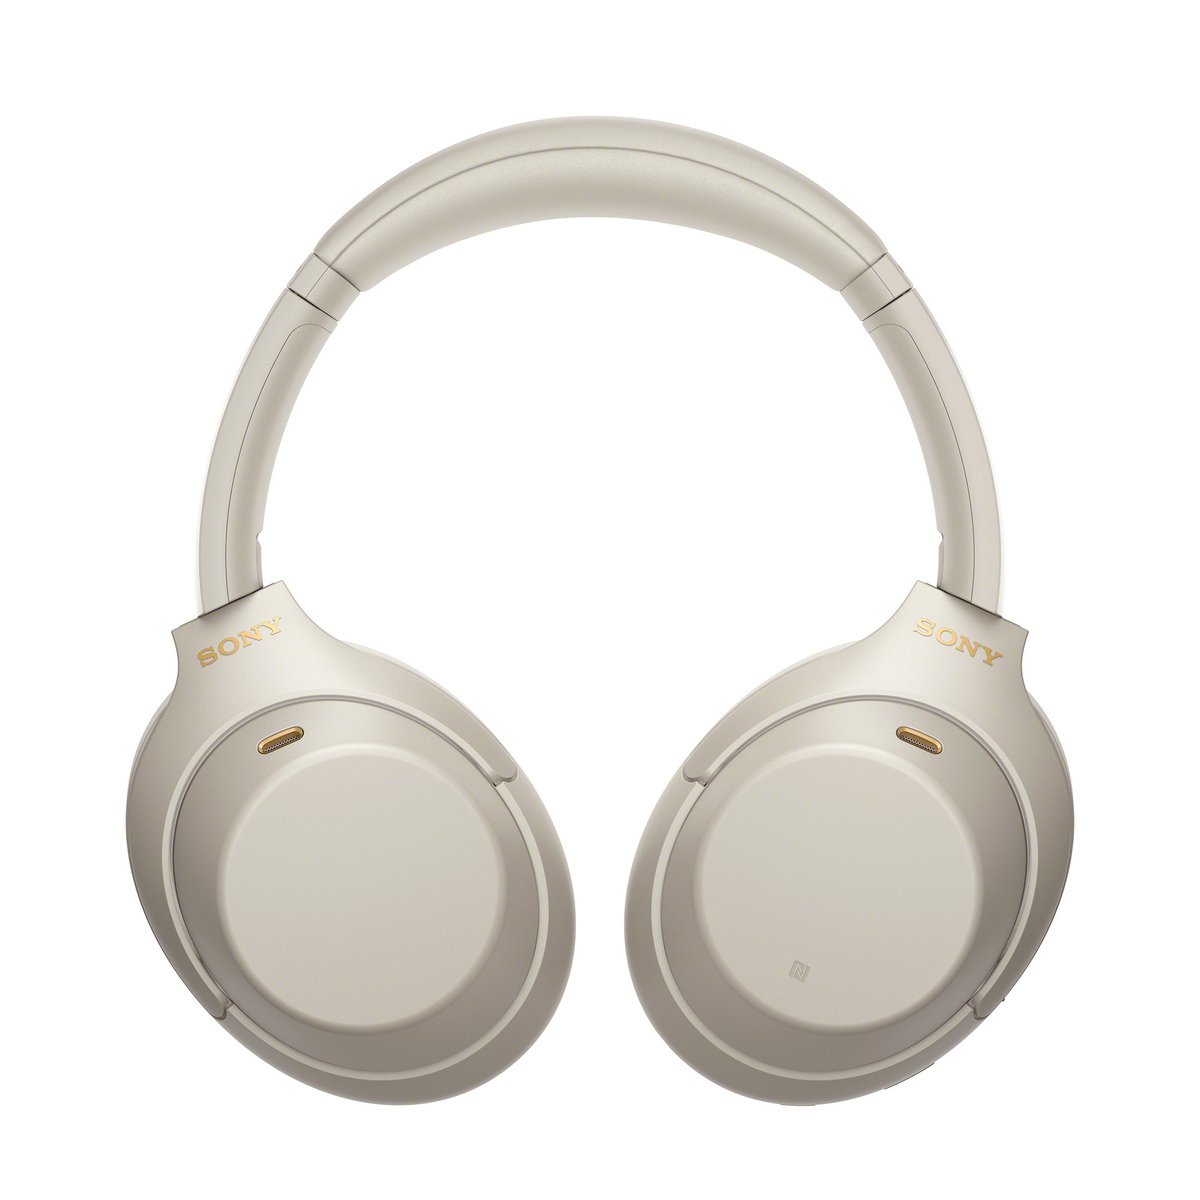 Sony WH-1000XM4 Noise-Canceling Headphones Silver